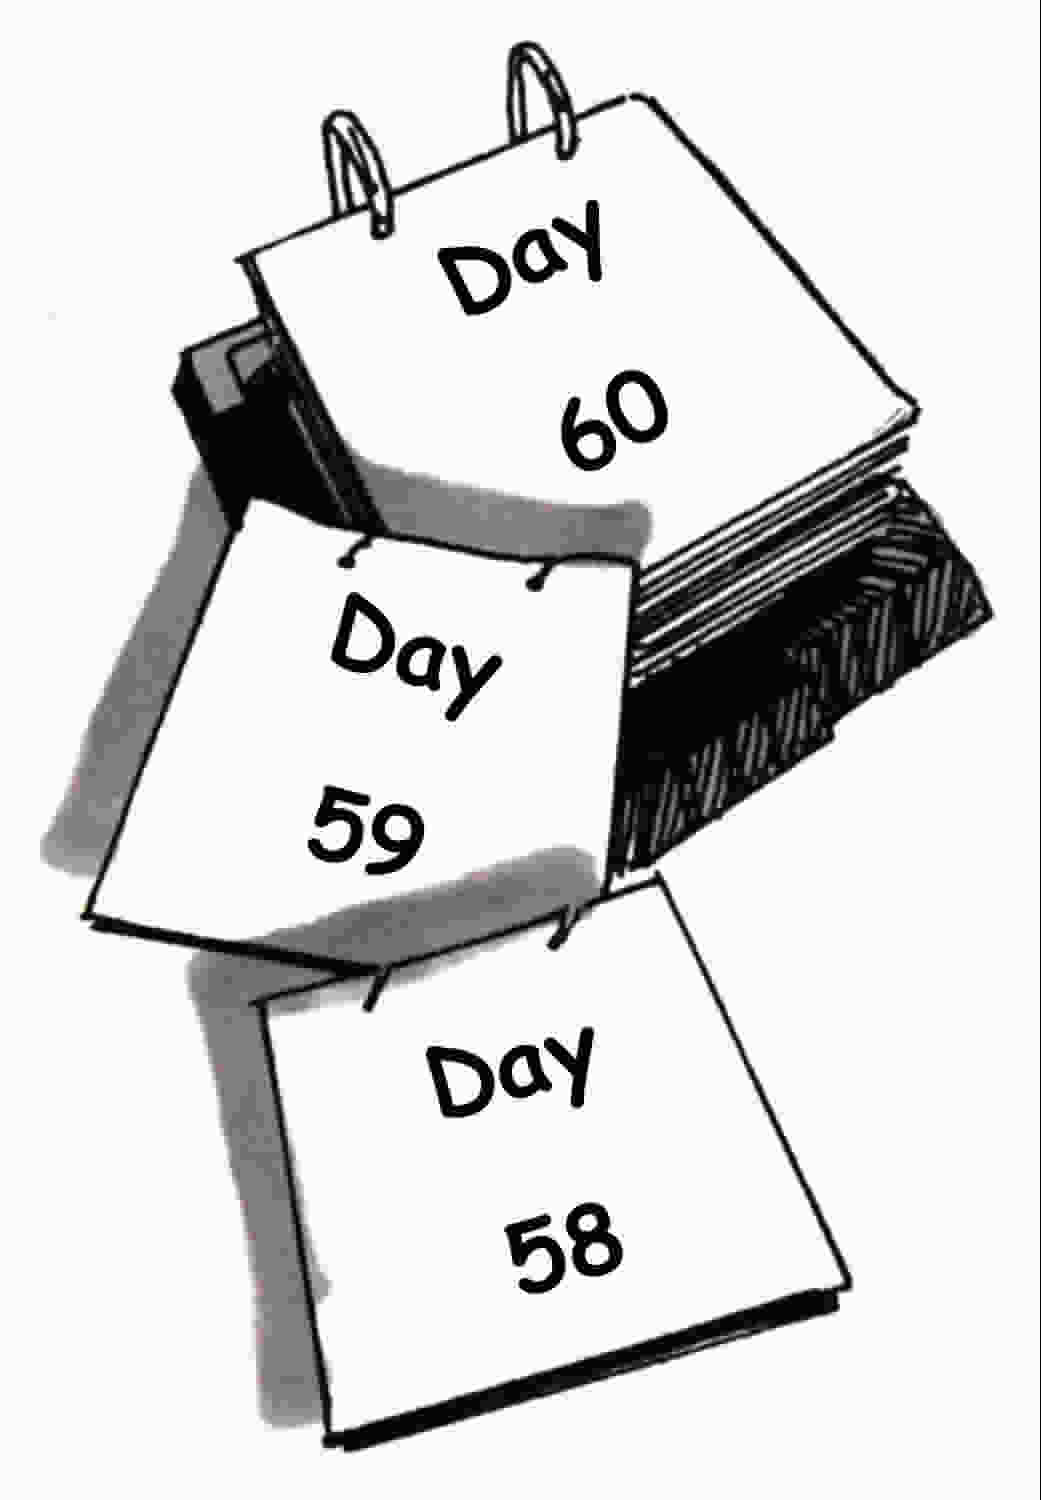 Calendar with falling pages with text "Day 58", "Day 59", and "Day 60"